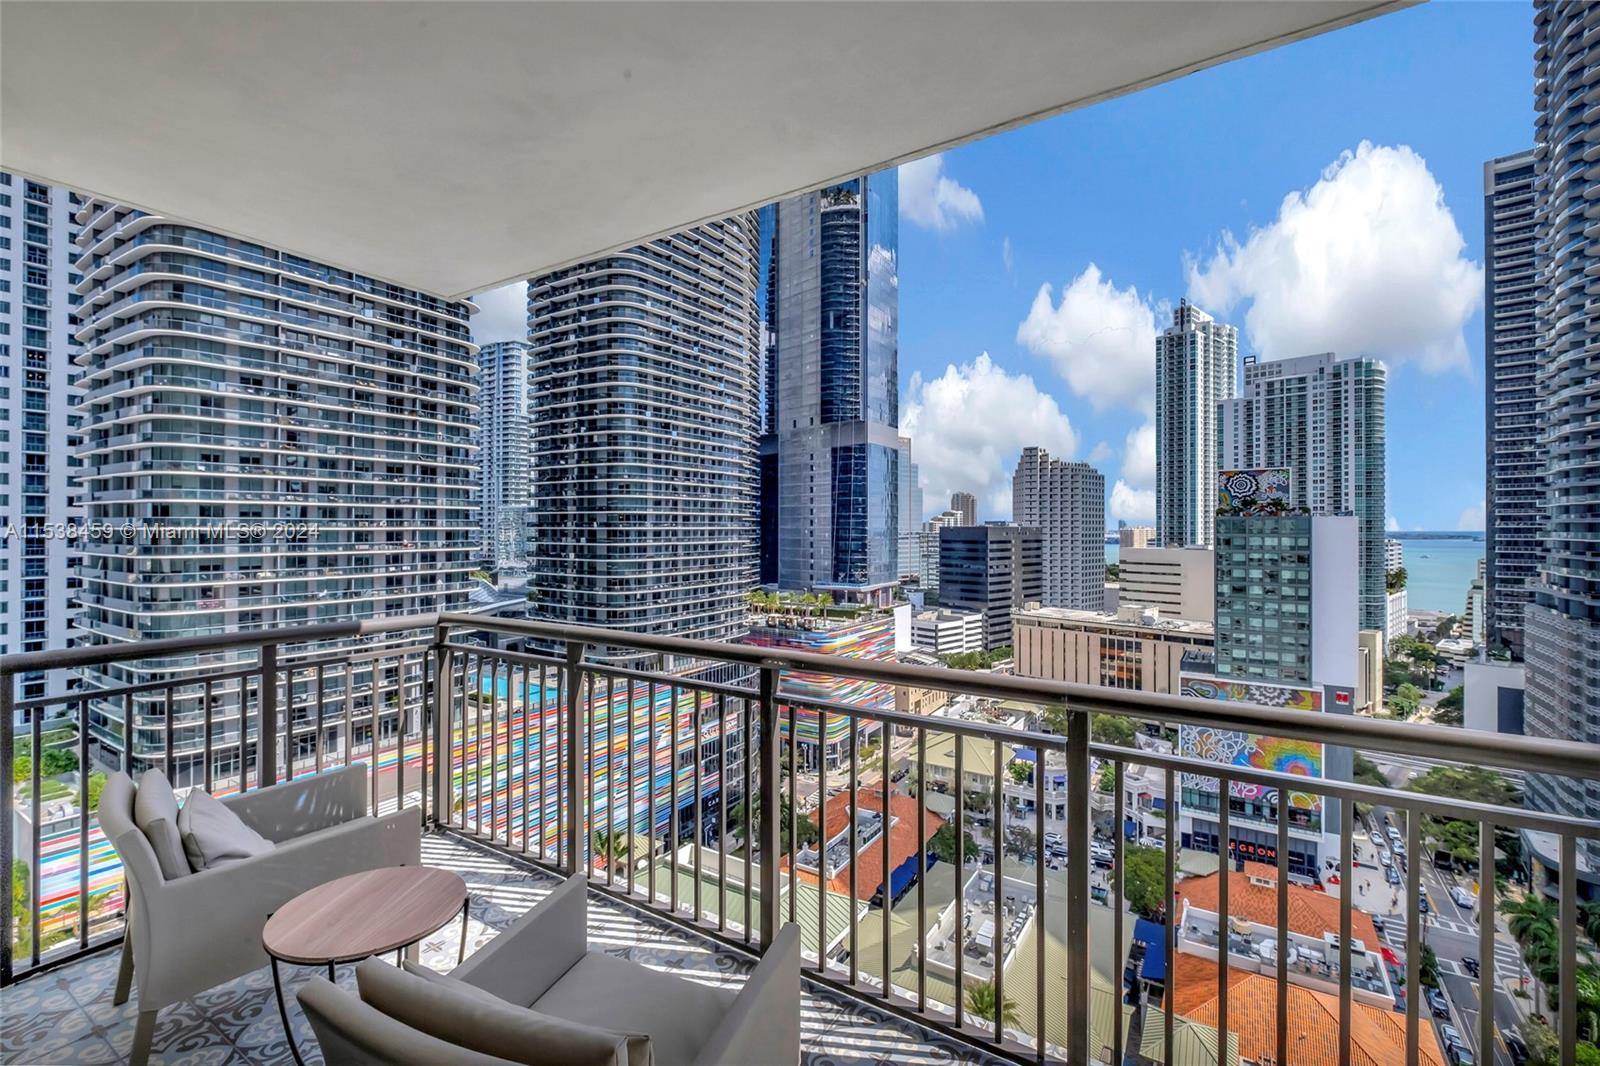 Step into luxury living in this fully furnished, turn-key ready unit nestled in the heart of Brickell Miami's Mary Brickell Village. Just steps from Brickell City Center and the metro rail station, this meticulously upgraded residence showcases over $70,000 in enhancements, including bedroom flooring, custom closets, balcony tile, stylish light fixtures, furniture and decorations. Revel in stunning daytime bay views and captivating city lights at night from this perfectly positioned home. Enjoy seamless access to high-end dining, fitness facilities, and beauty boutiques, epitomizing convenience and sophistication. Don't miss this opportunity to embrace luxury living in one of Miami's most sought-after neighborhoods—schedule your private viewing today!